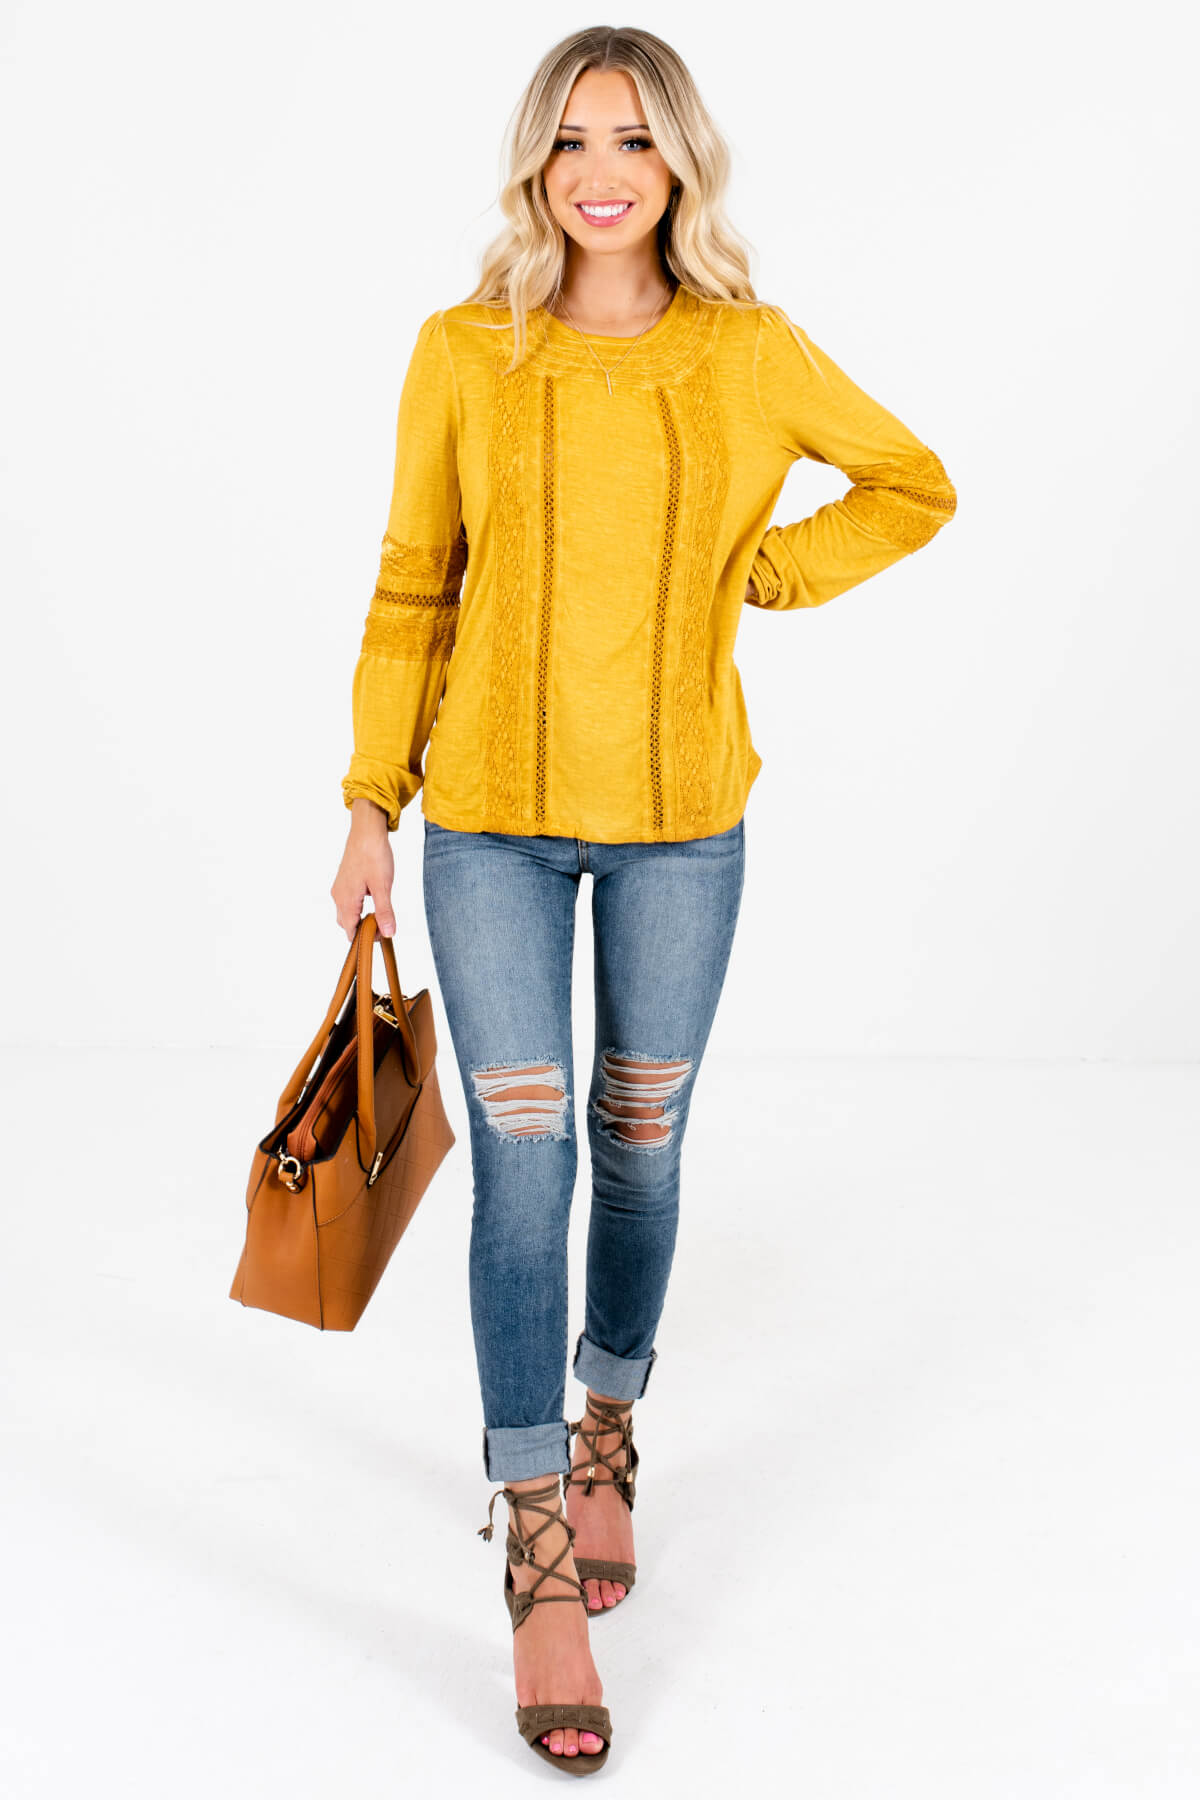 Mustard Yellow Cute and Comfortable Boutique Tops for Women